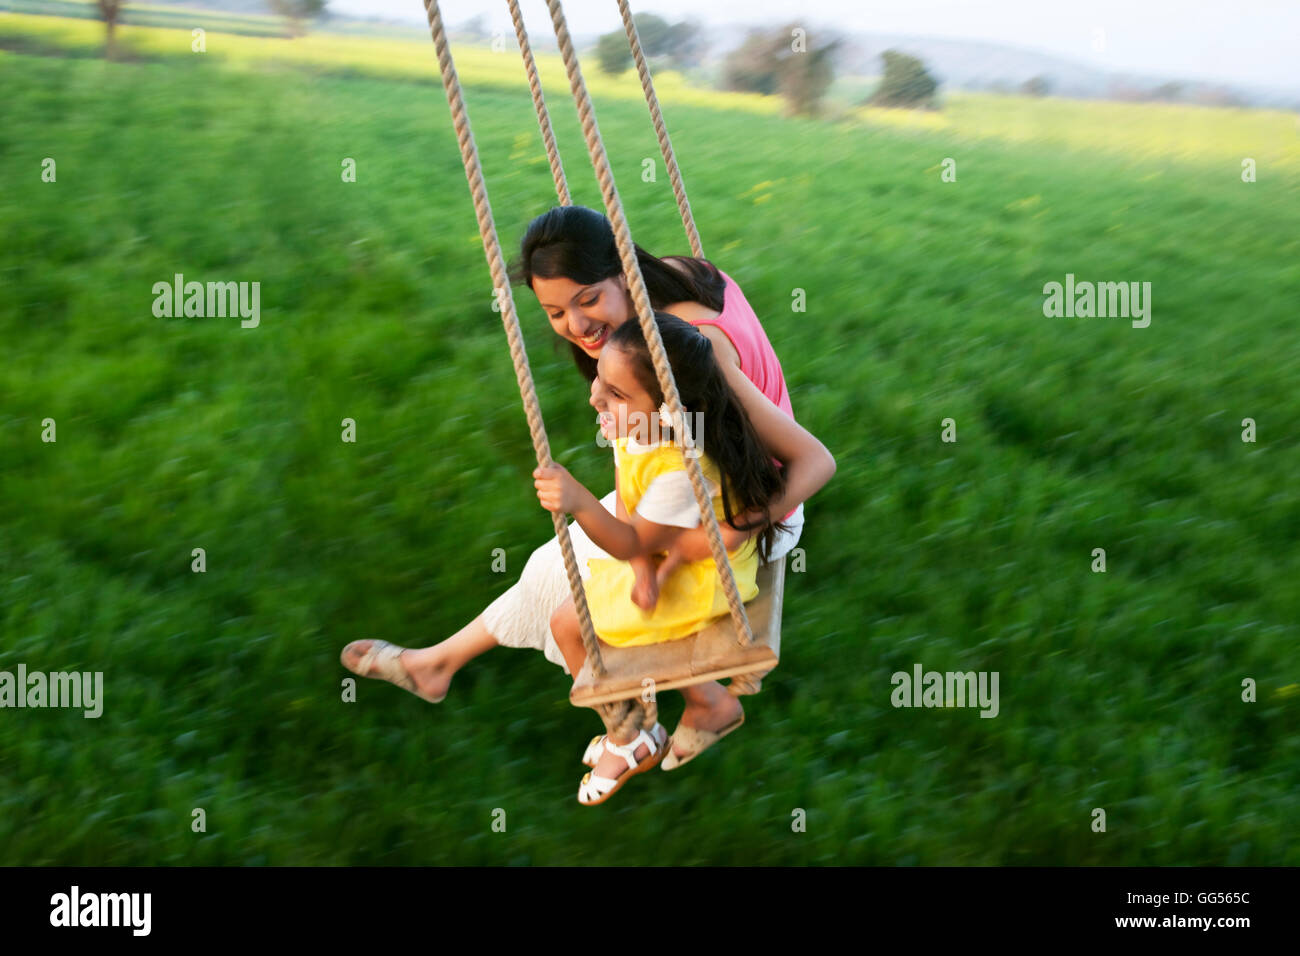 Mother and daughter having fun on a swing Stock Photo